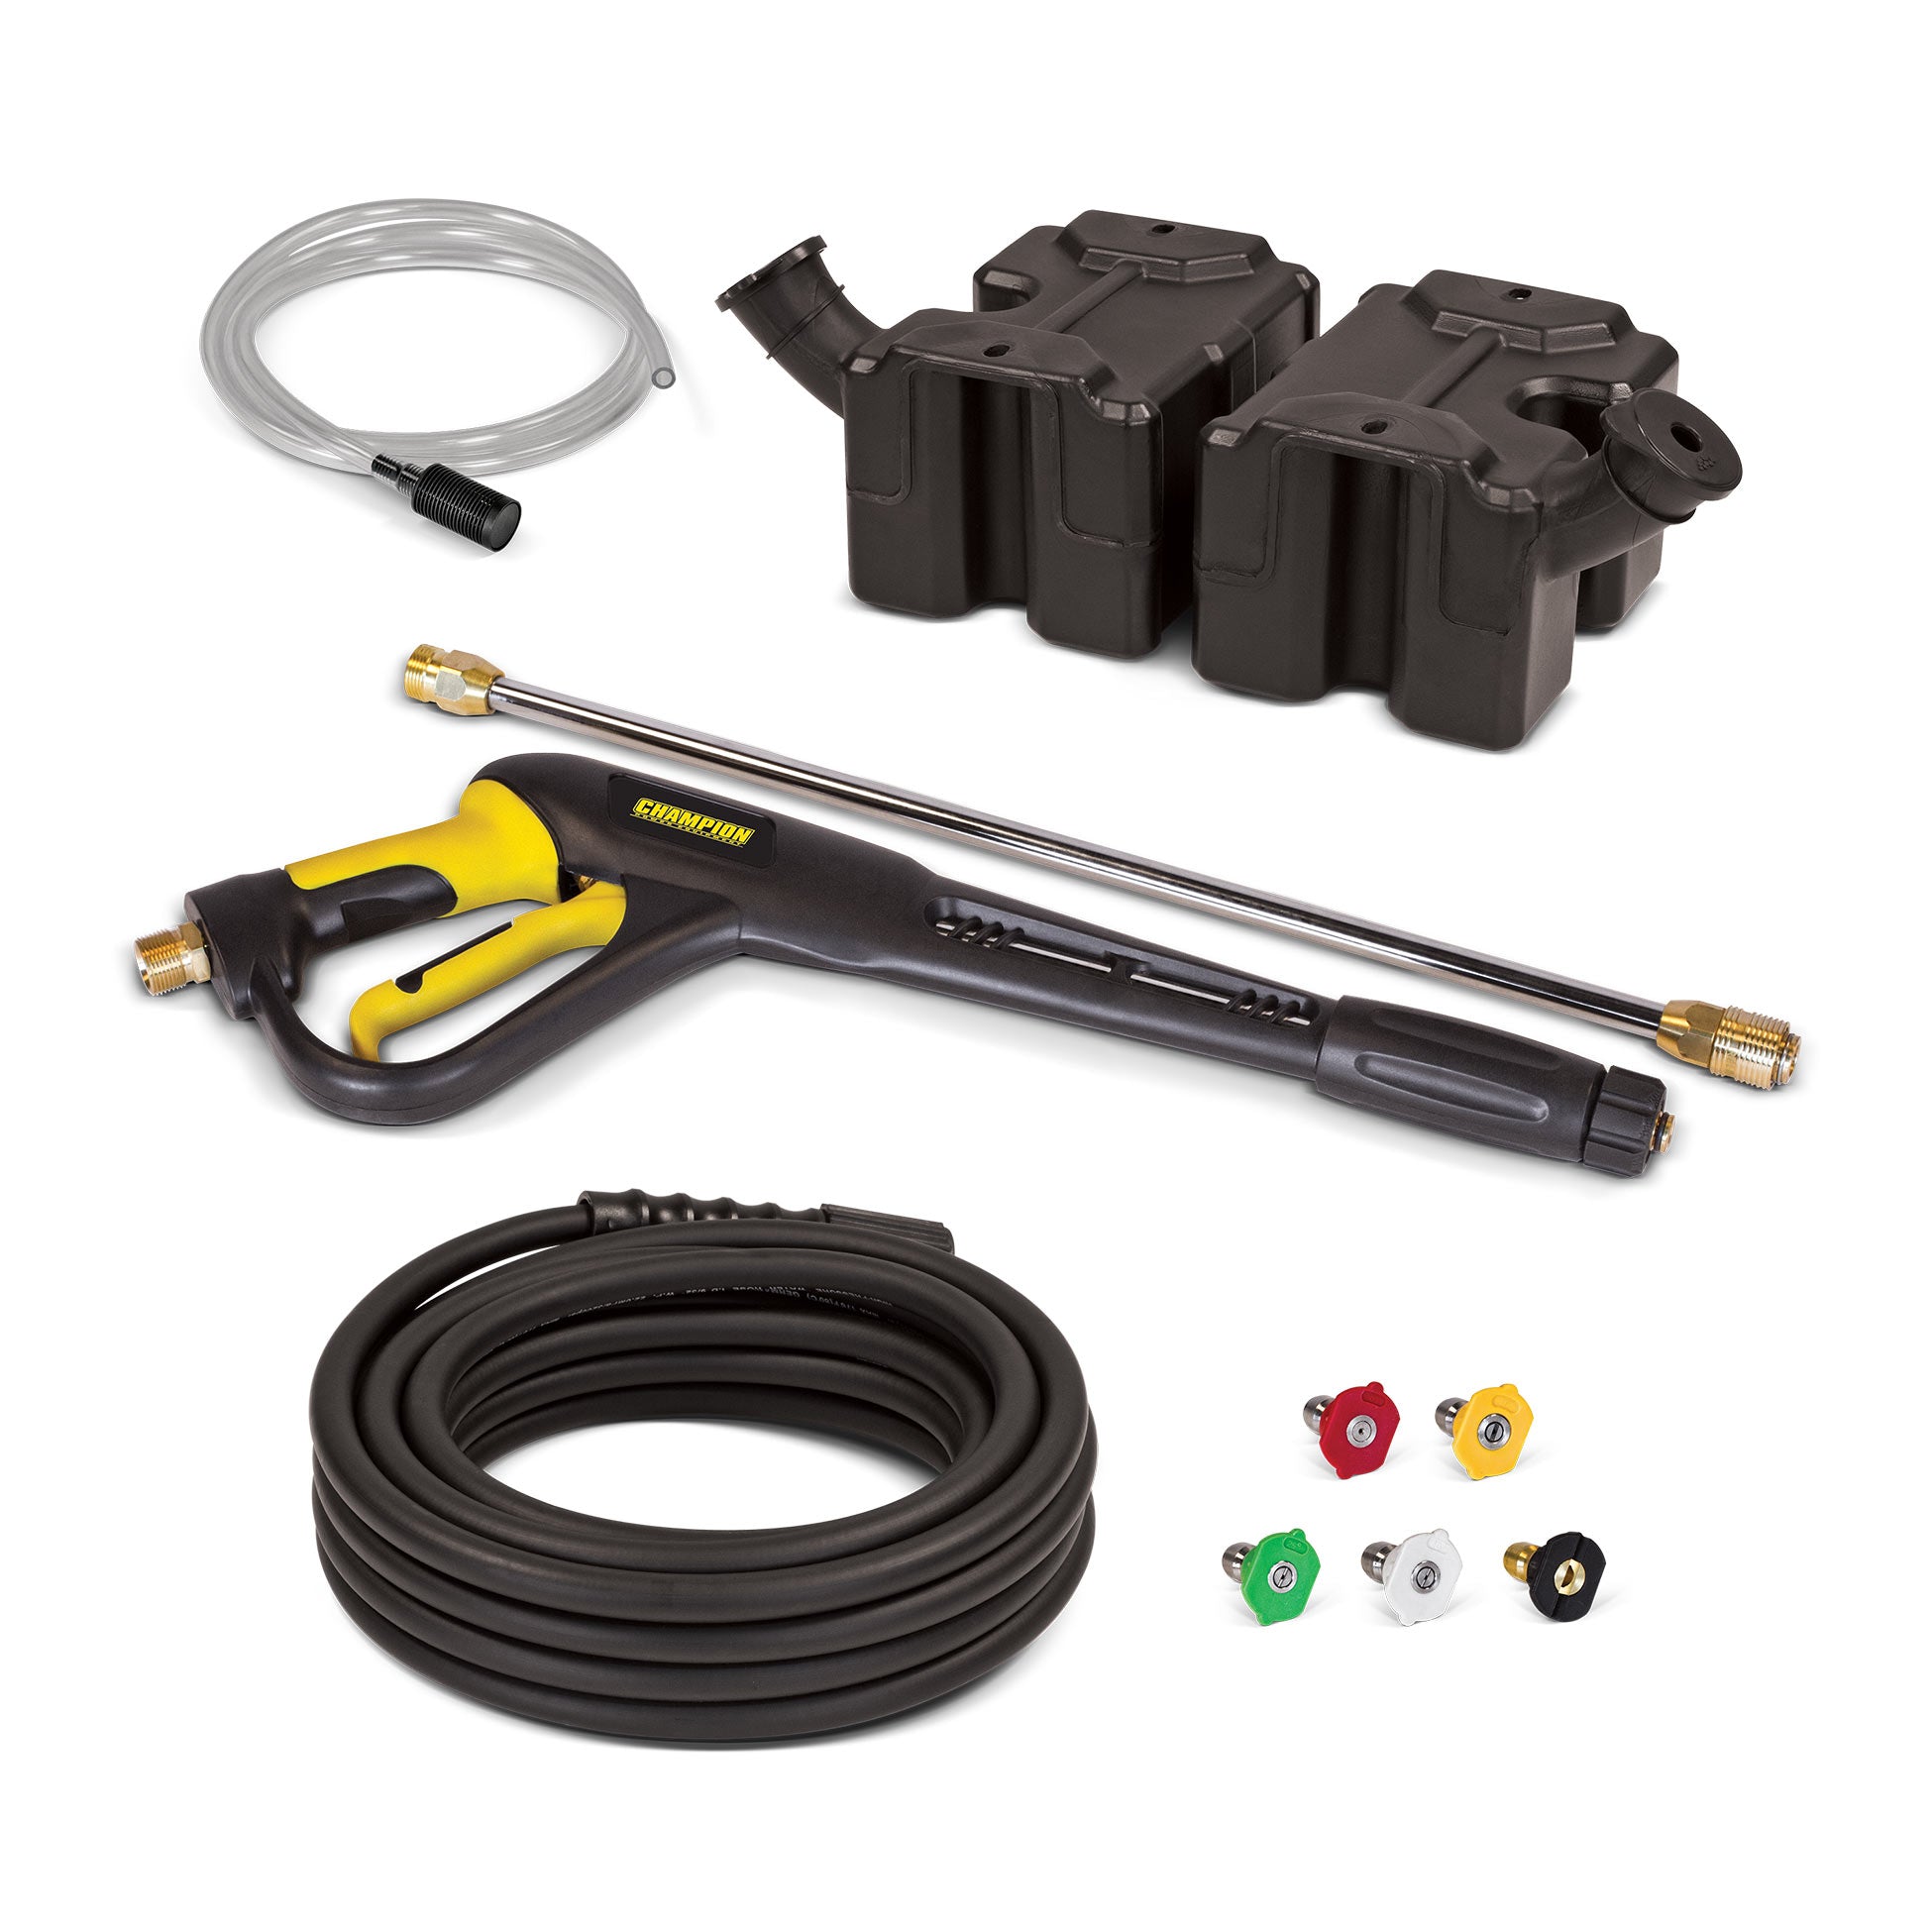 Accessories for the Champion 220 Bar (3200 PSI) 9.0 LPM Pressure Washer